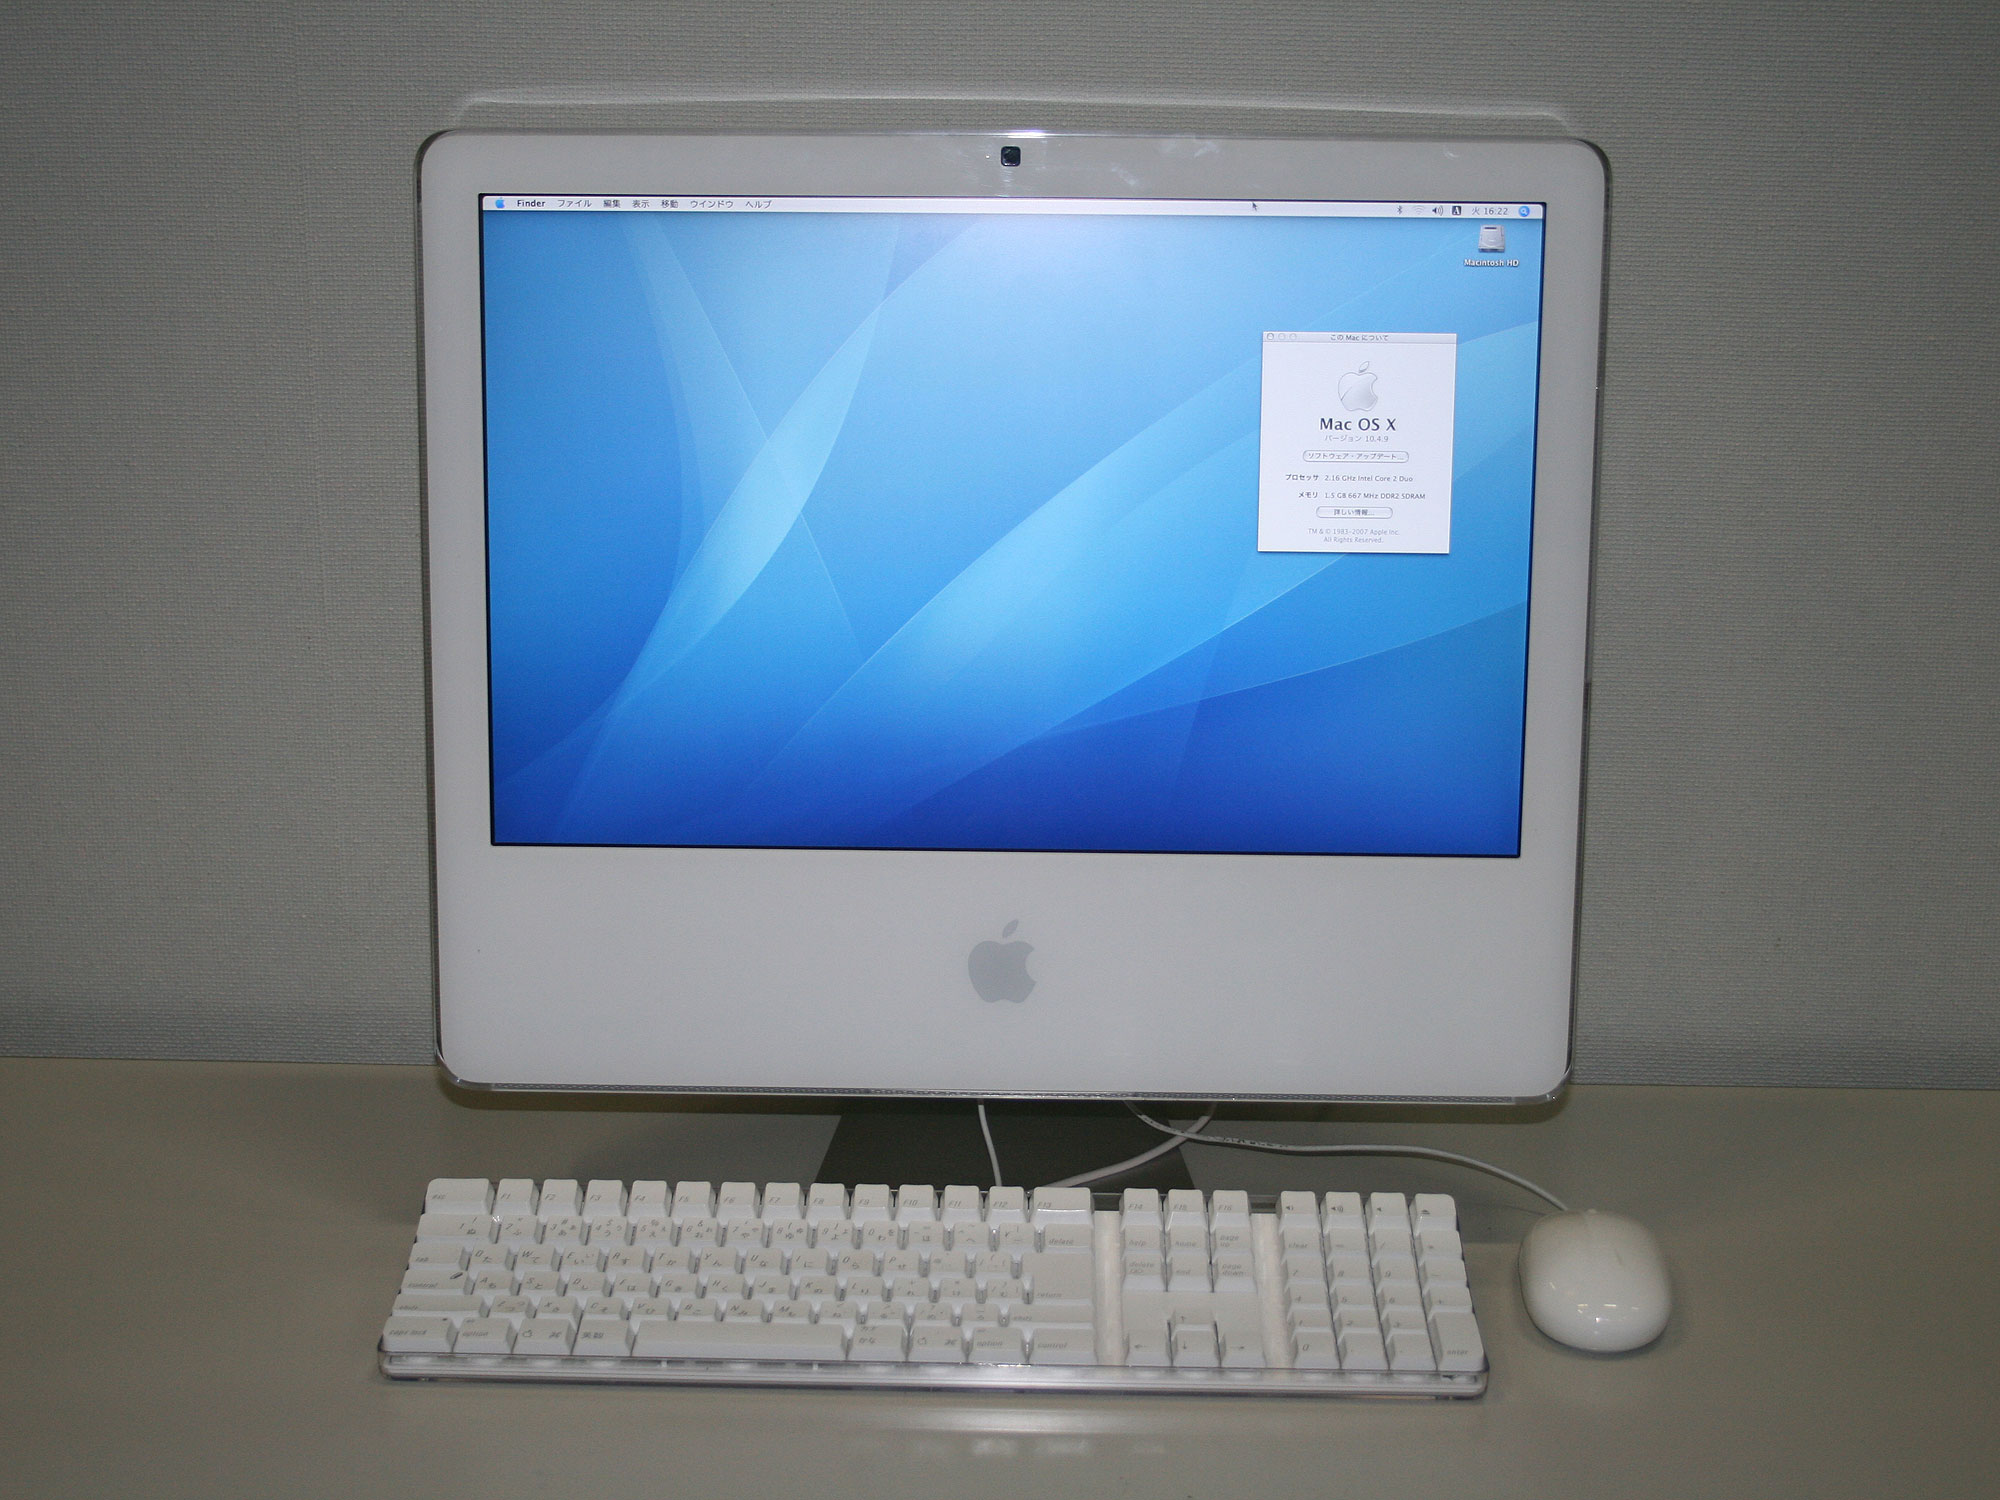 apple computer monitor, keyboard and mouse on table